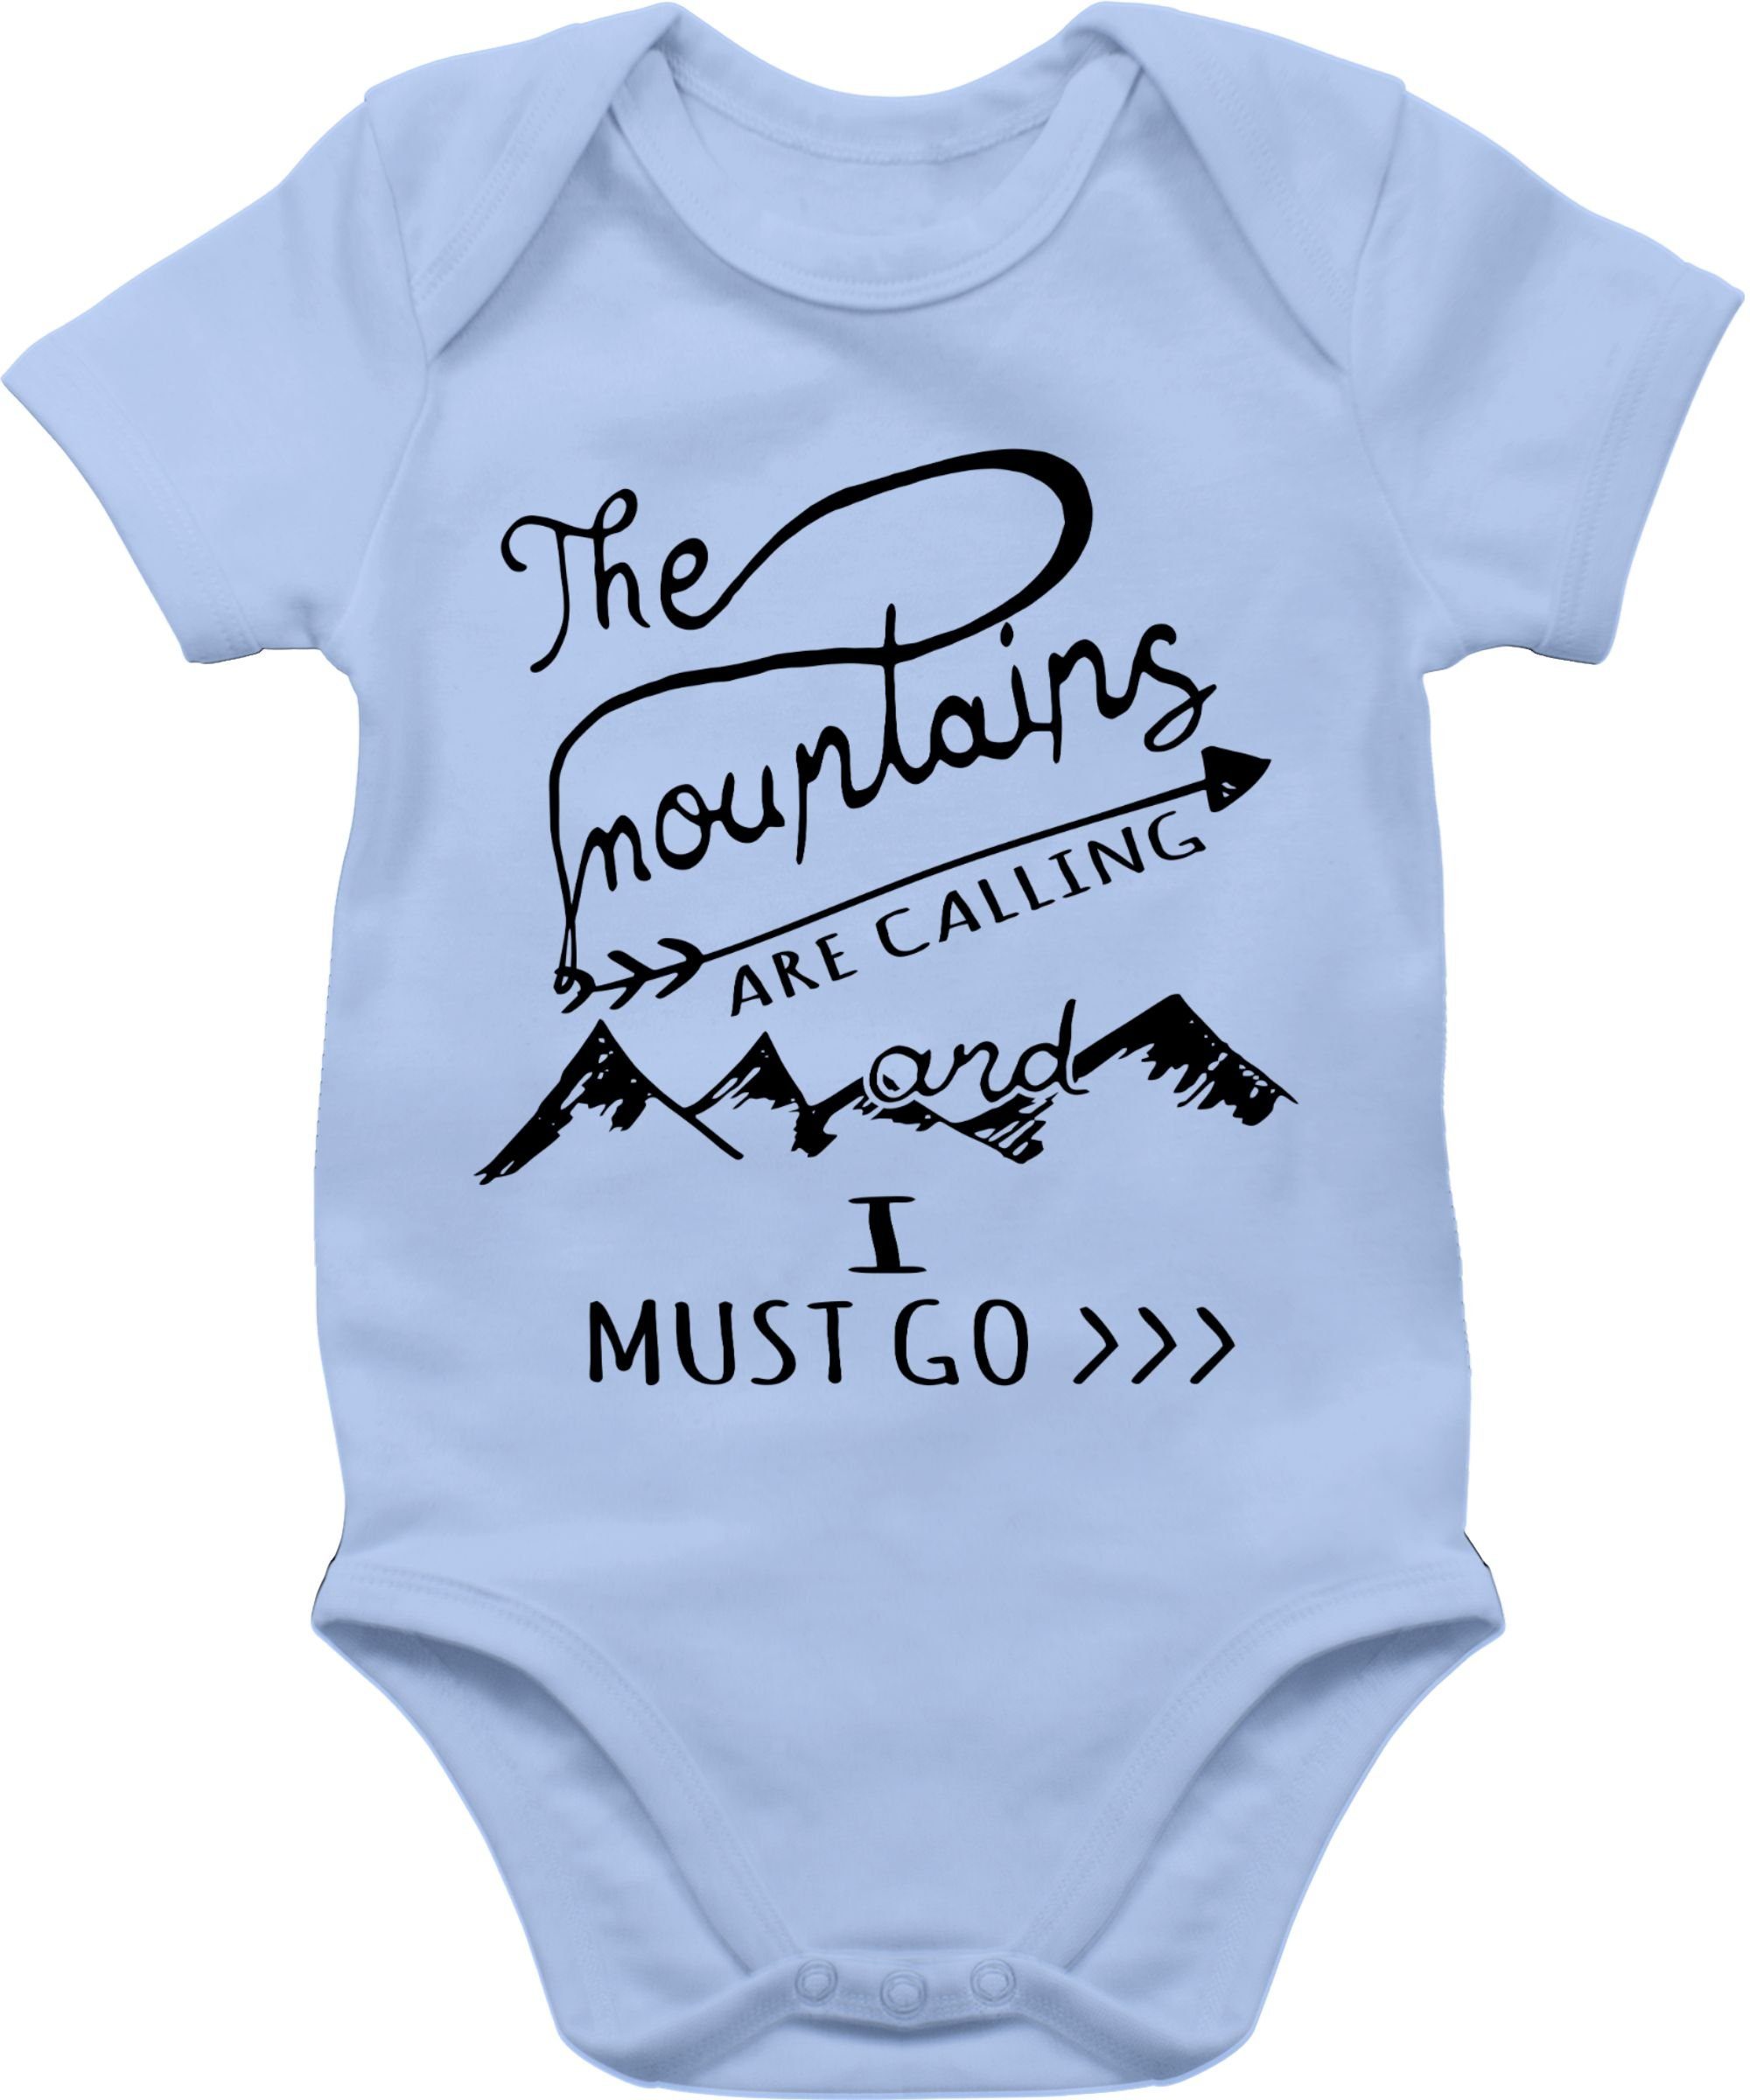 The Mountains Aktuelle Shirtracer Shirtbody 2 calling Babyblau are Baby Trends